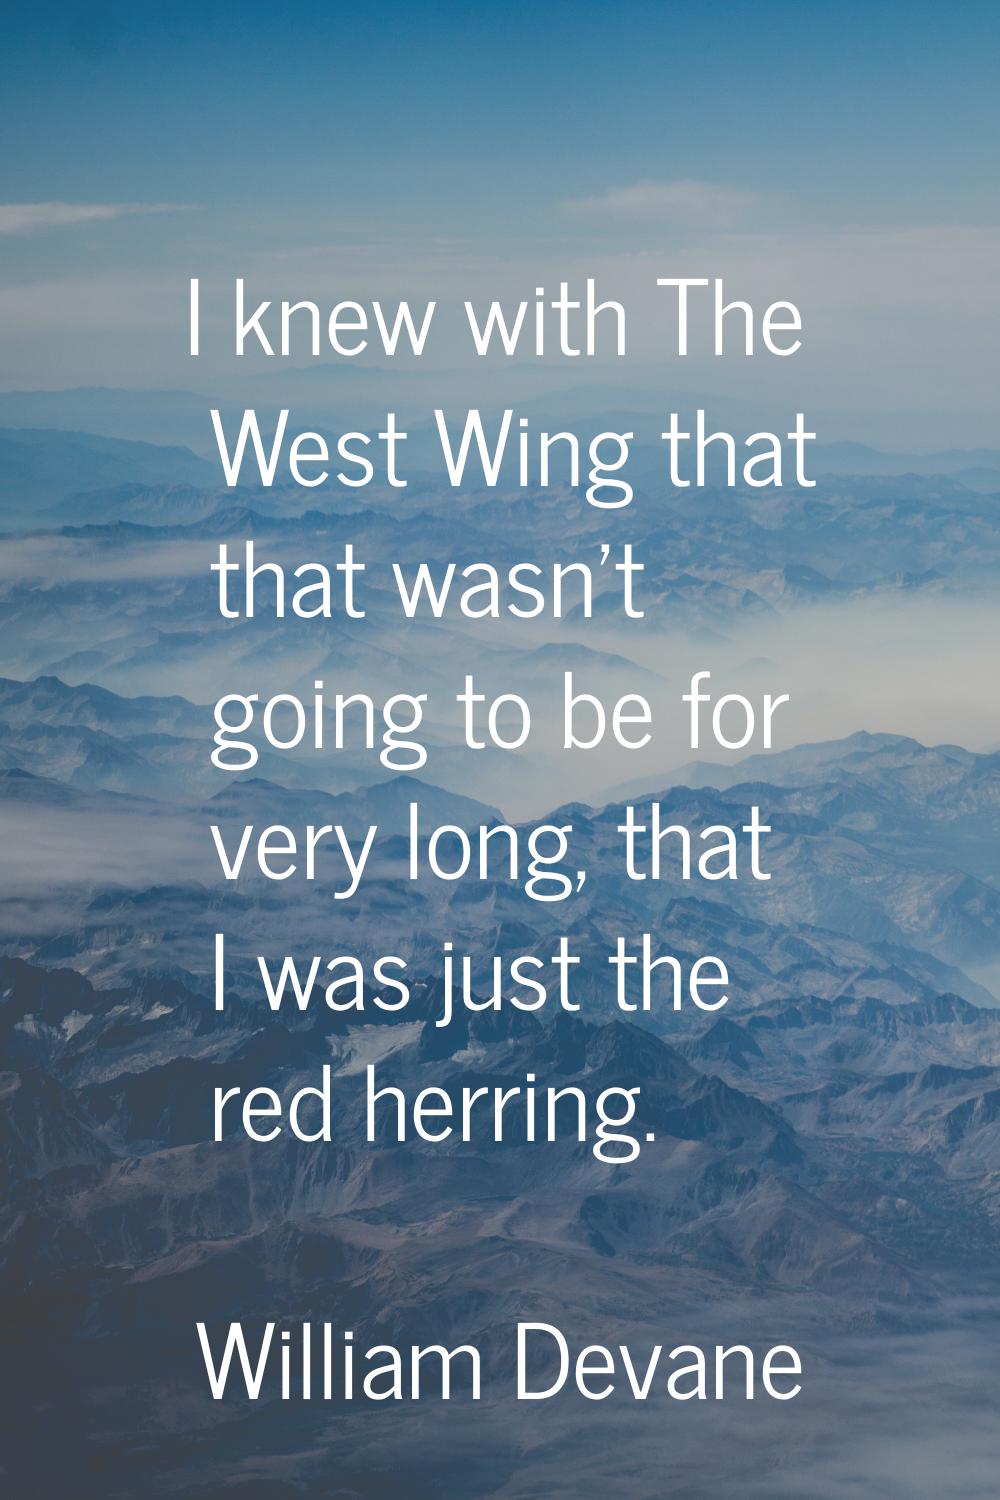 I knew with The West Wing that that wasn't going to be for very long, that I was just the red herri